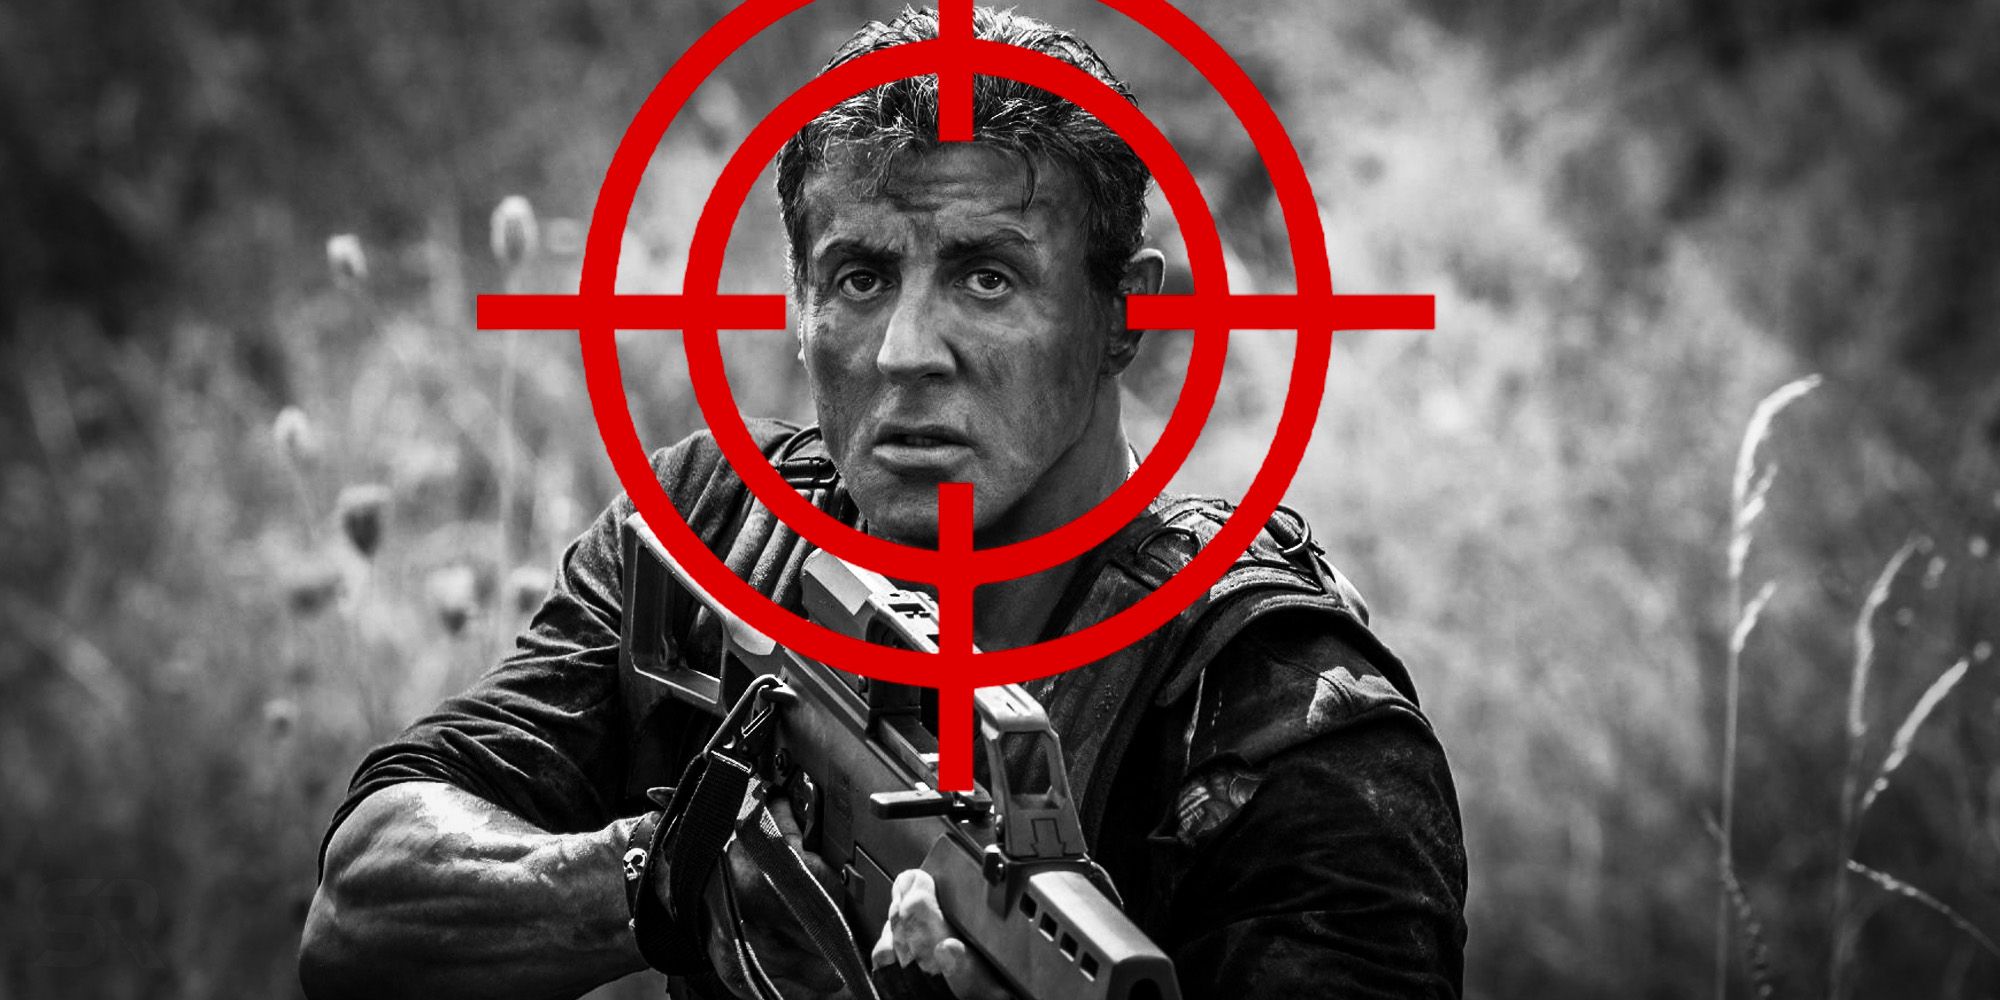 Sylvester Stallone expendables 4 detail hints at Barneys death